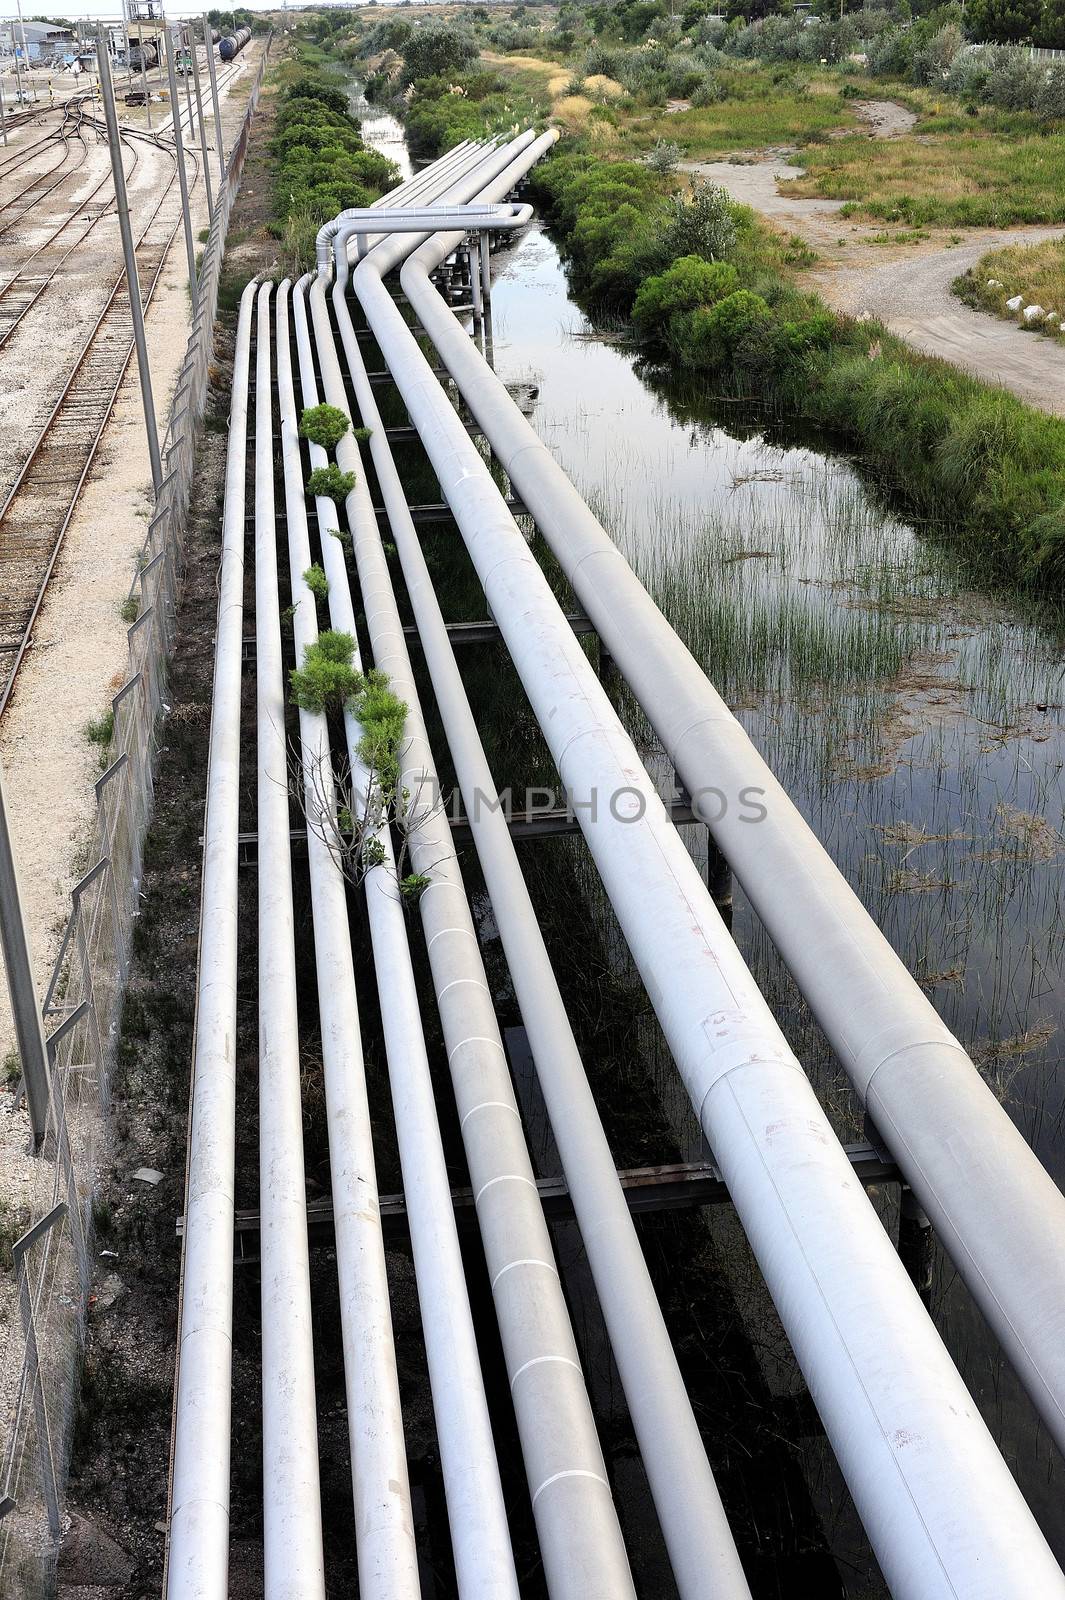 Pipelines of the oil refinery of Fos on sea beside Marseilles.